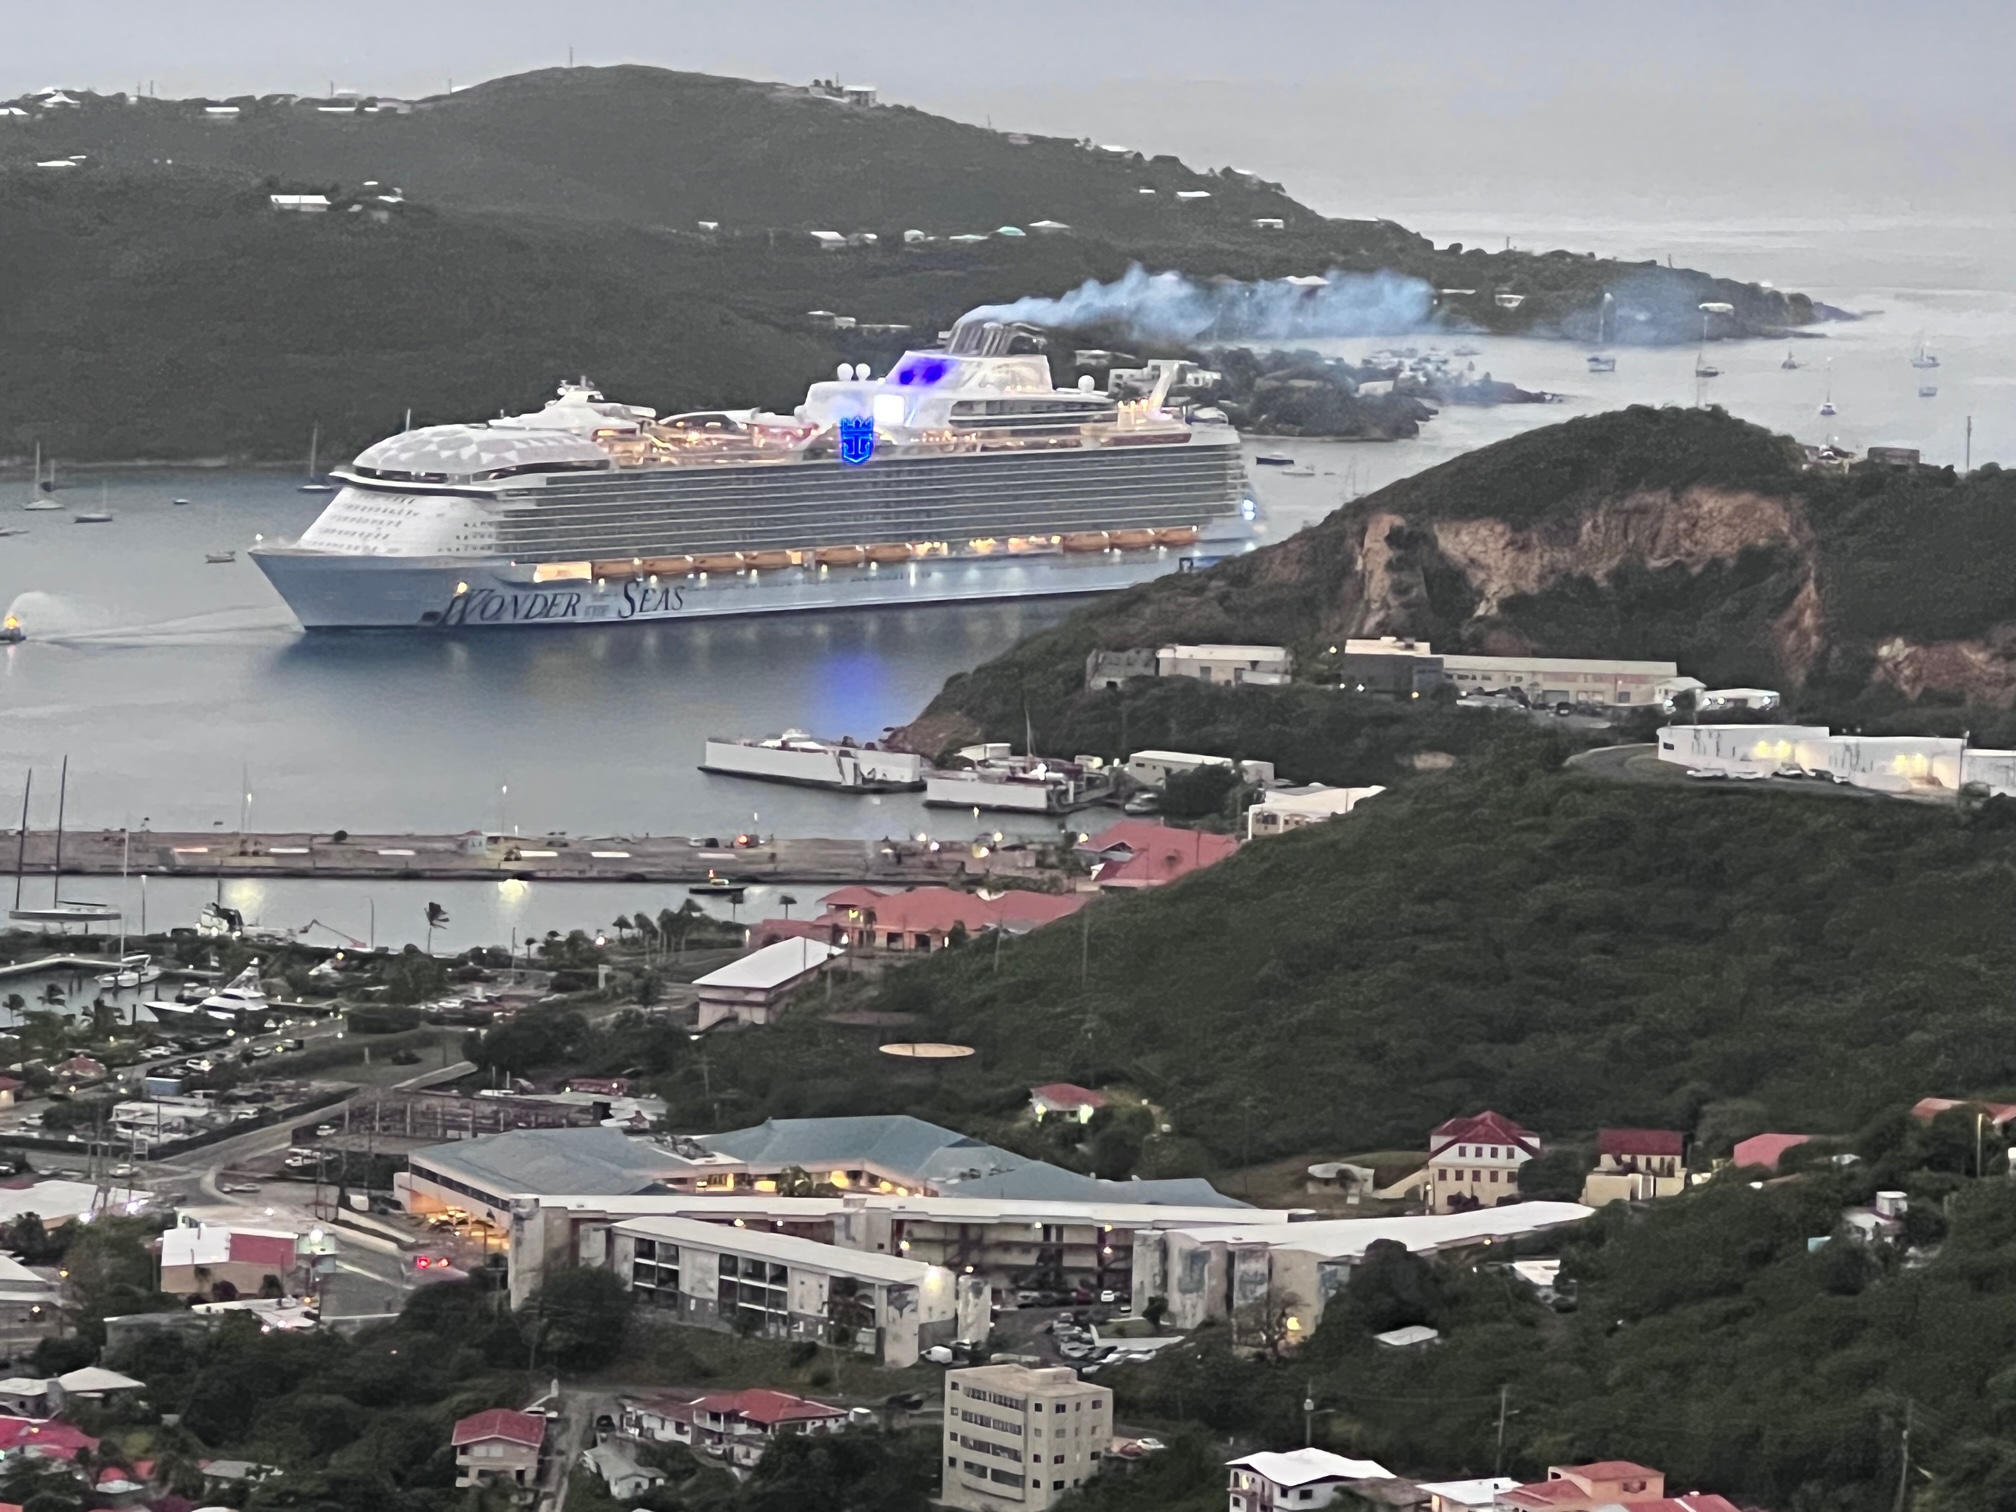 The Wonder of the Seas makes its way to the dock at Crown Bay, St. Thomas, early Tuesday morning. (Source photo by Michele Weichman)